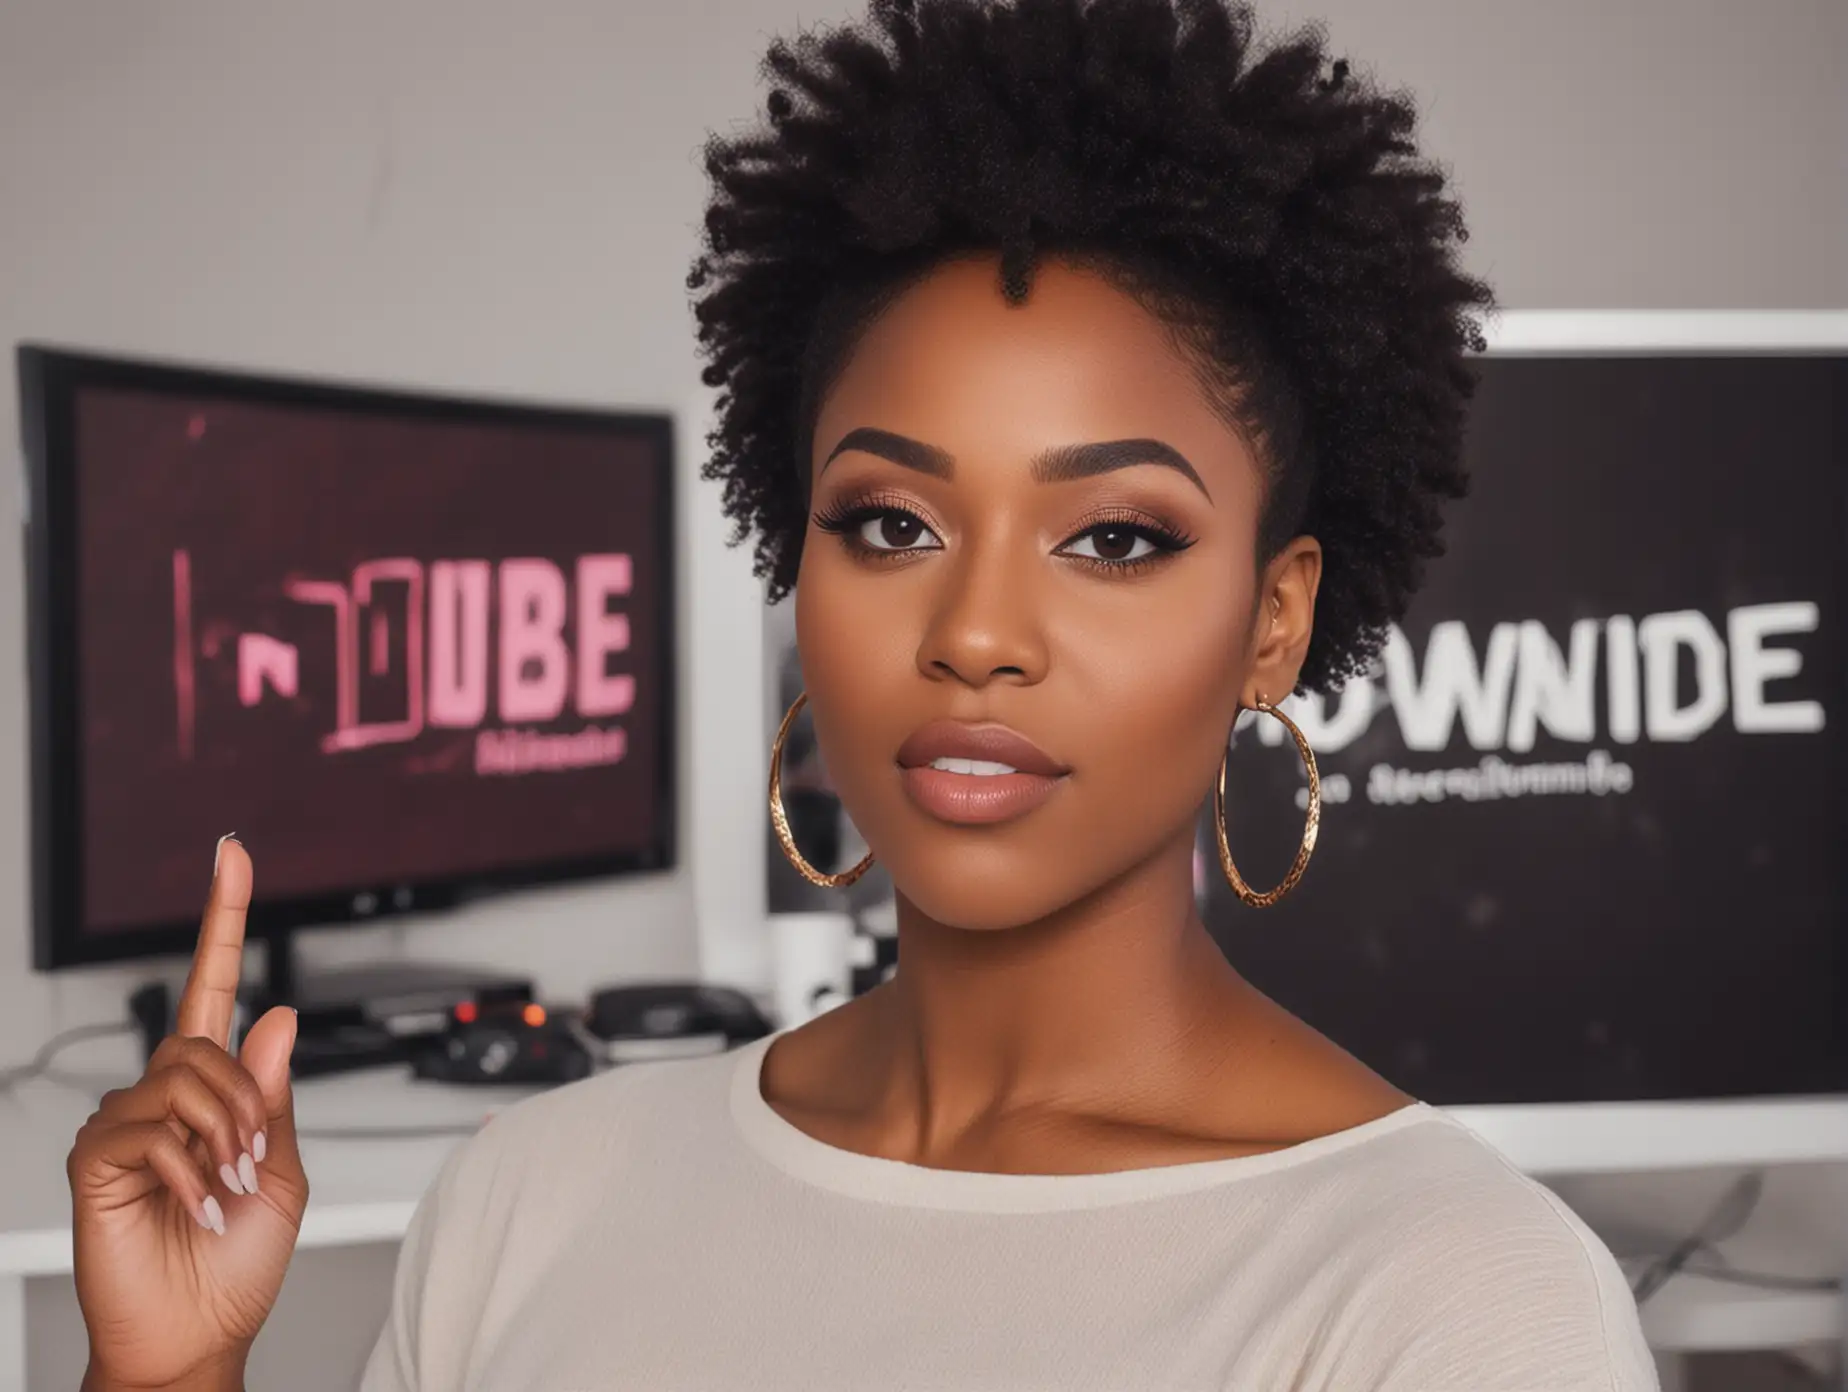 black women banner for youtube saids subscripted to channel 
 
